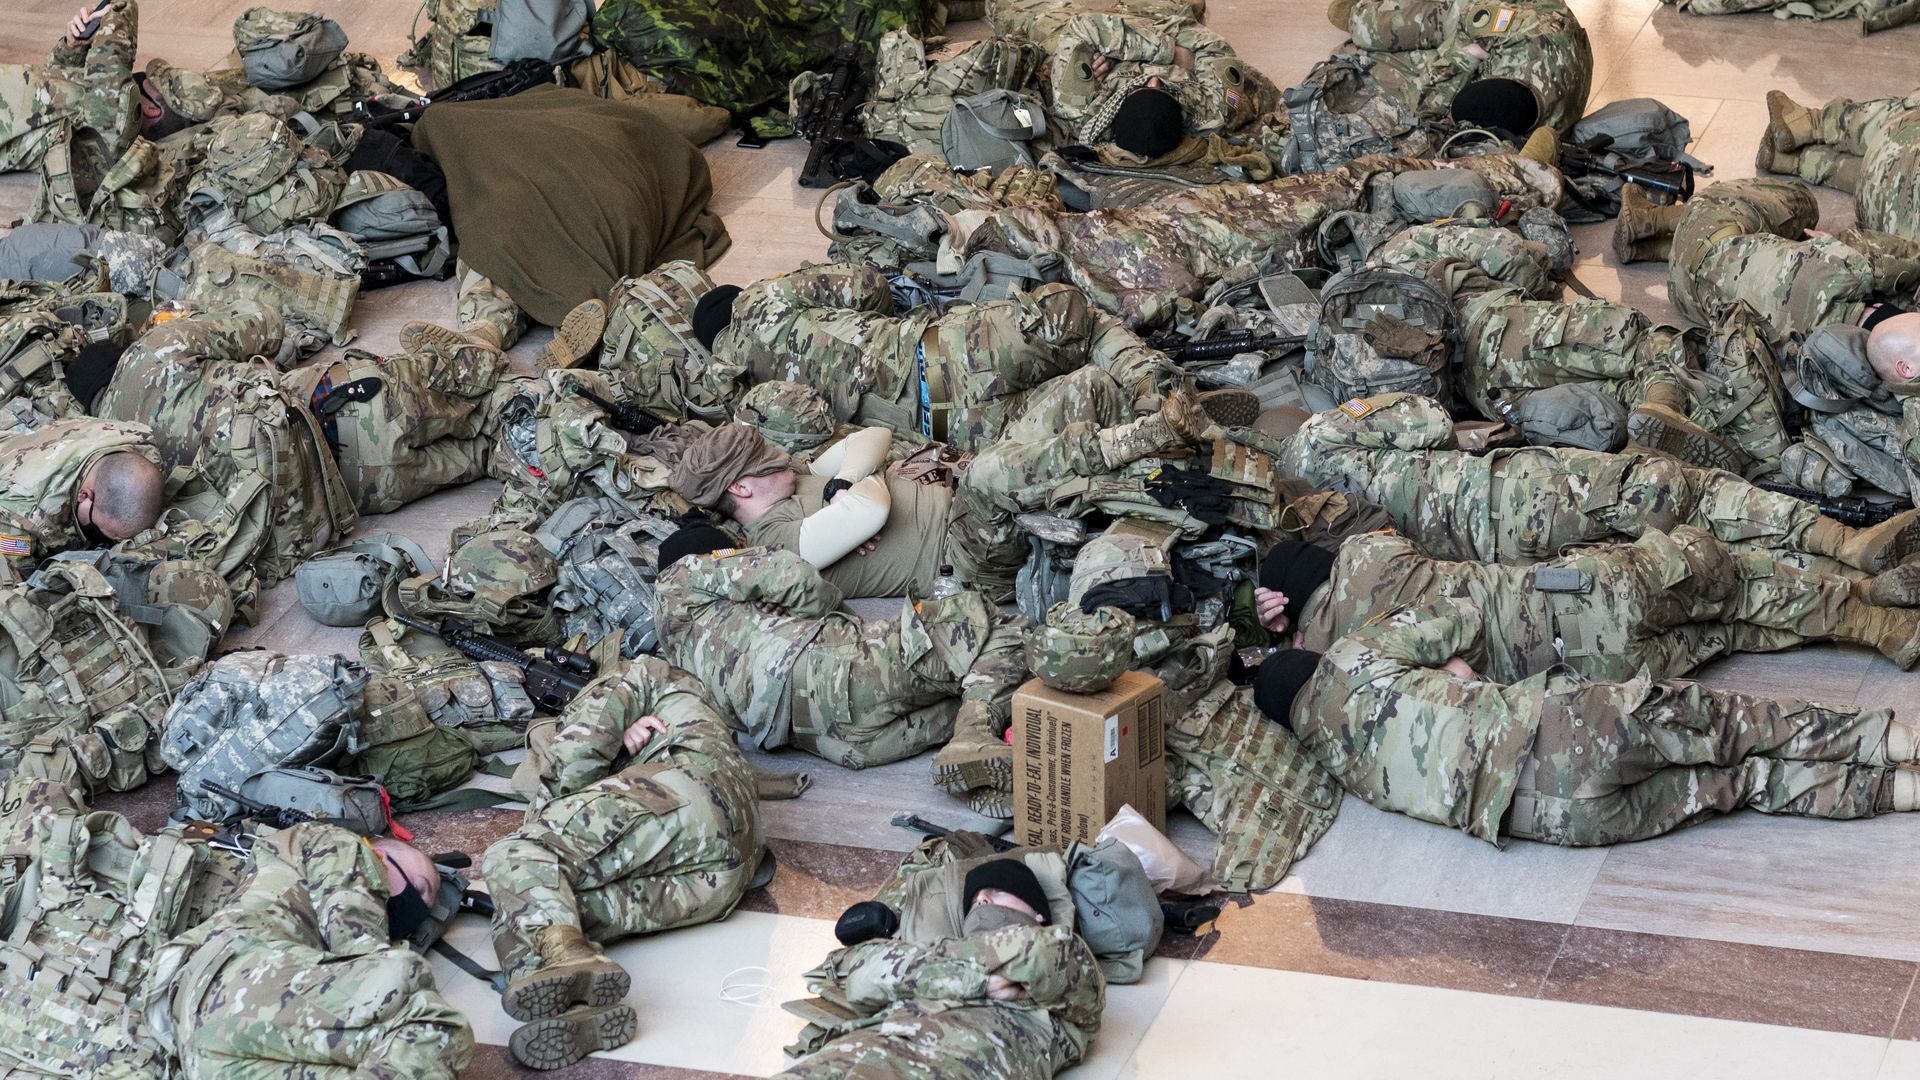 Soldiers sleeping in the Capitol building.